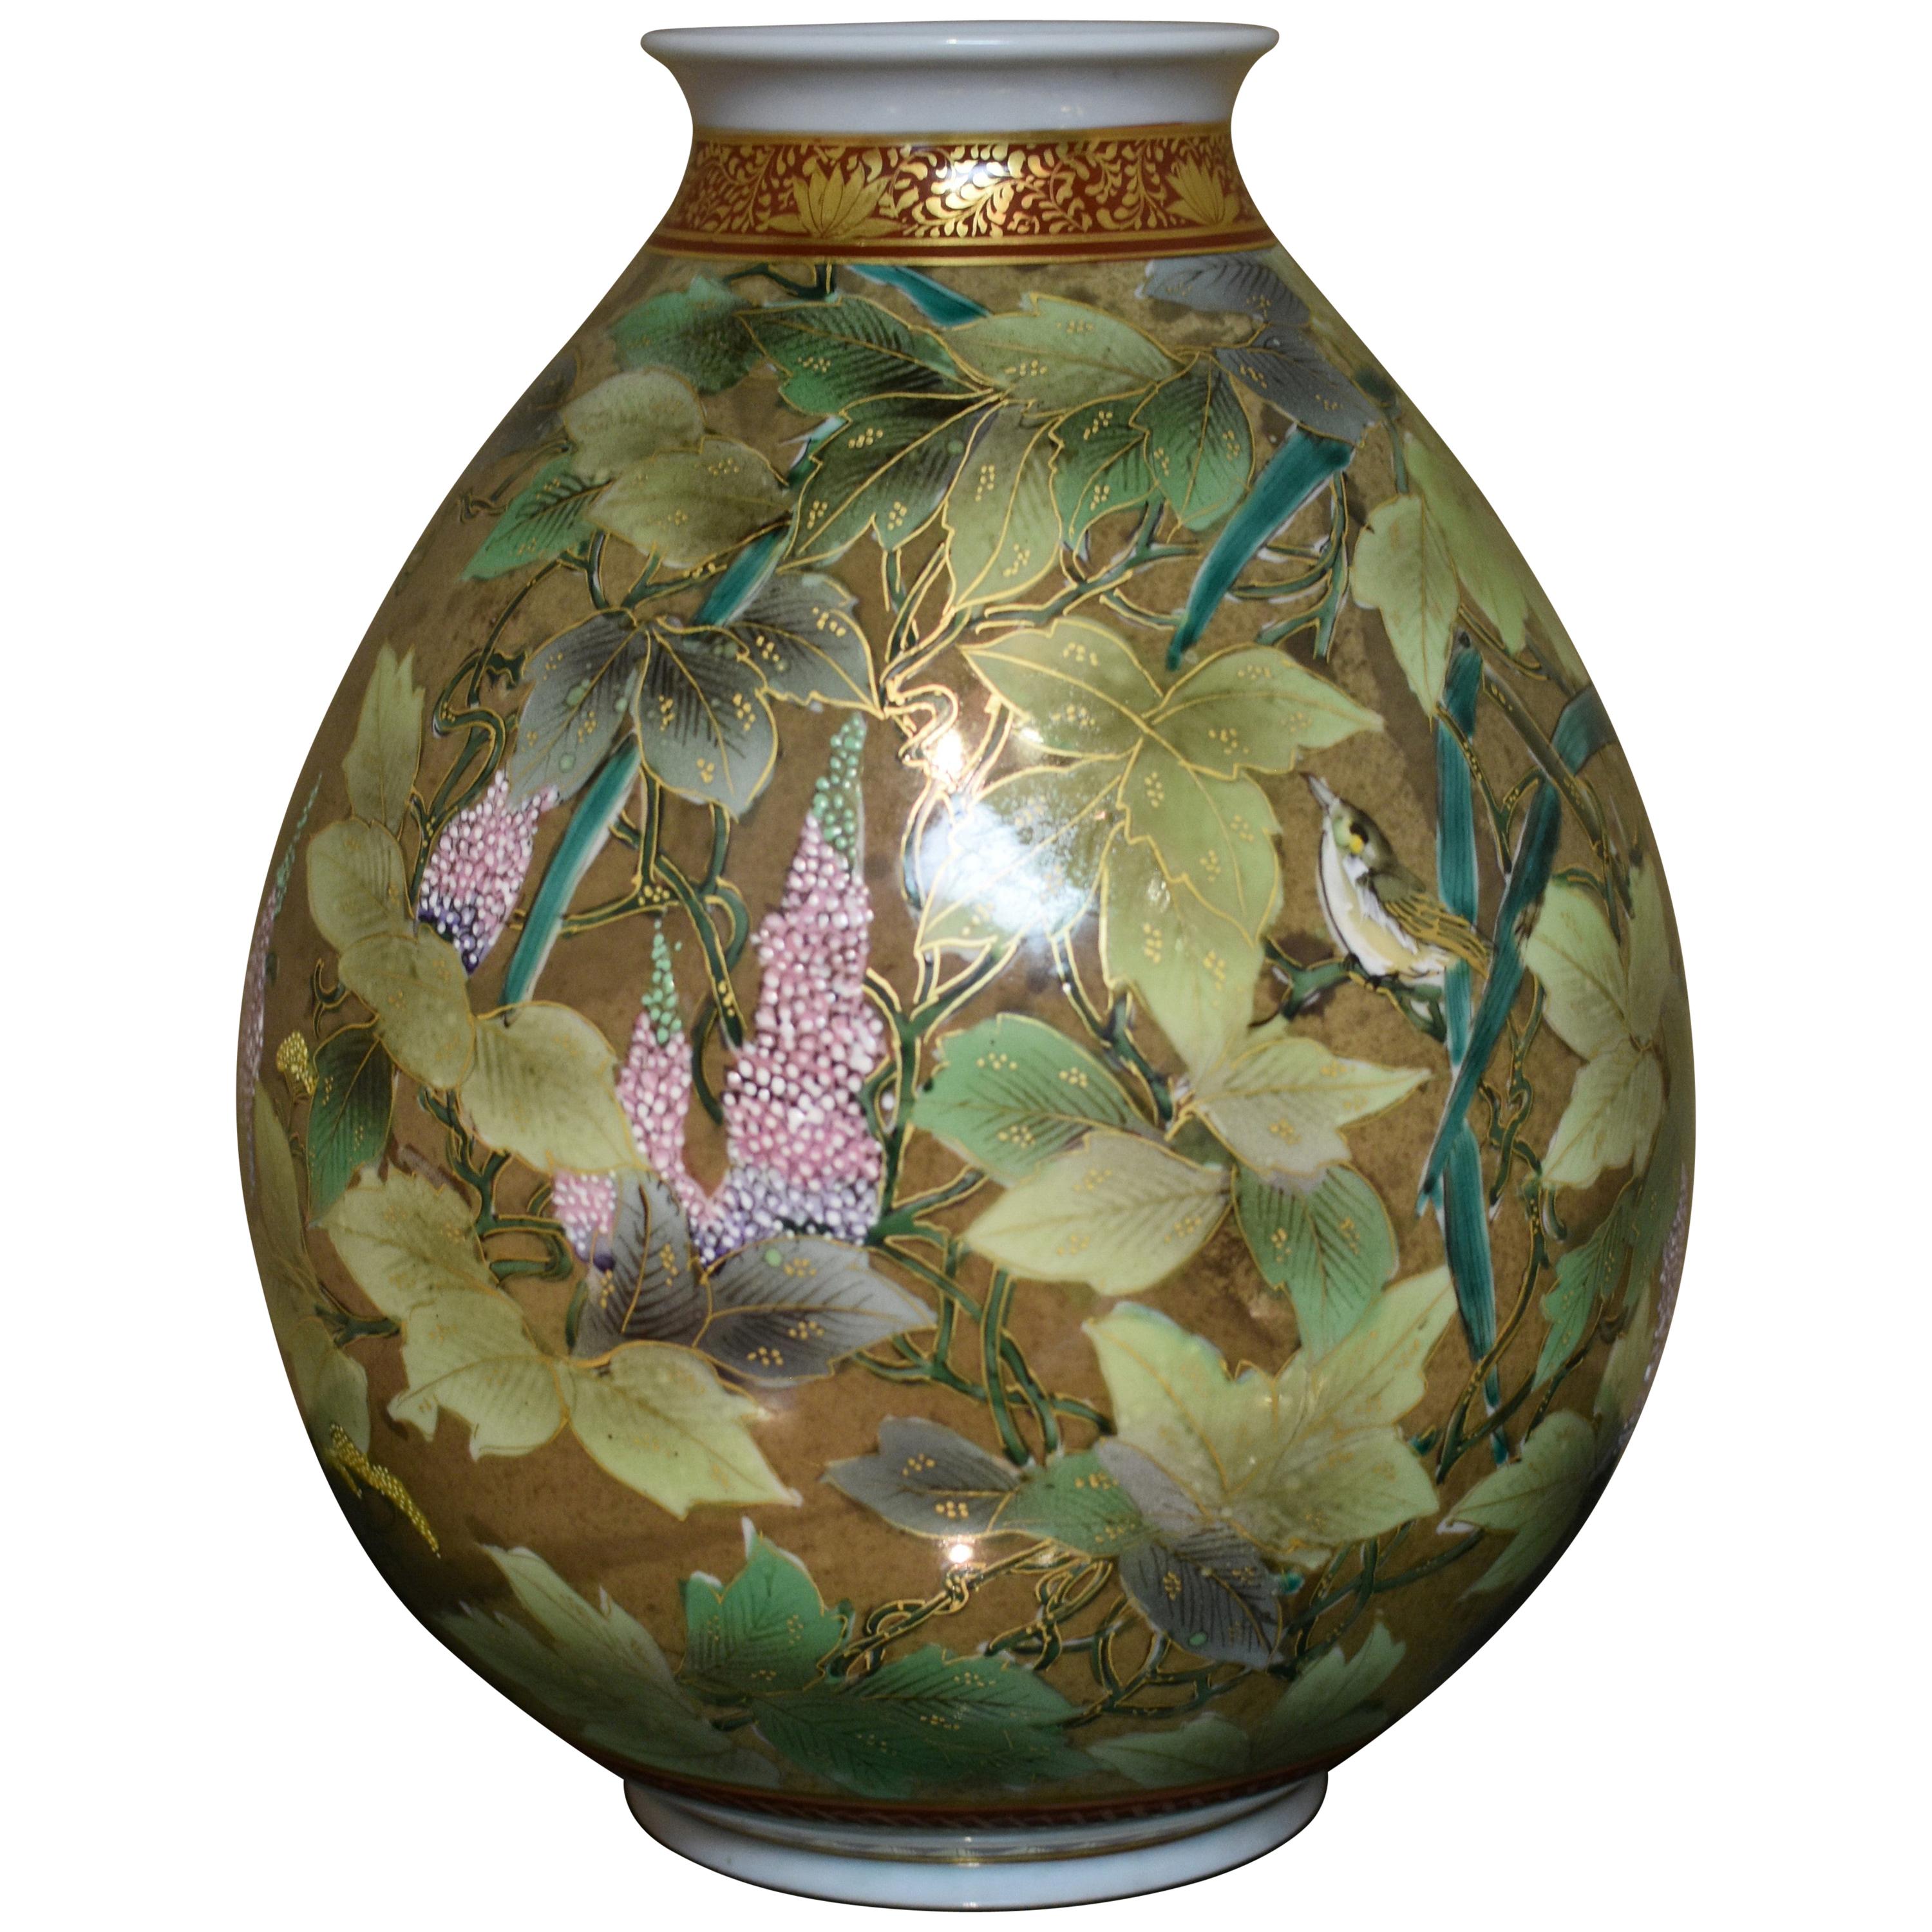 Porcelain Vase Green Gold by Contemporary Japanese Master Artist